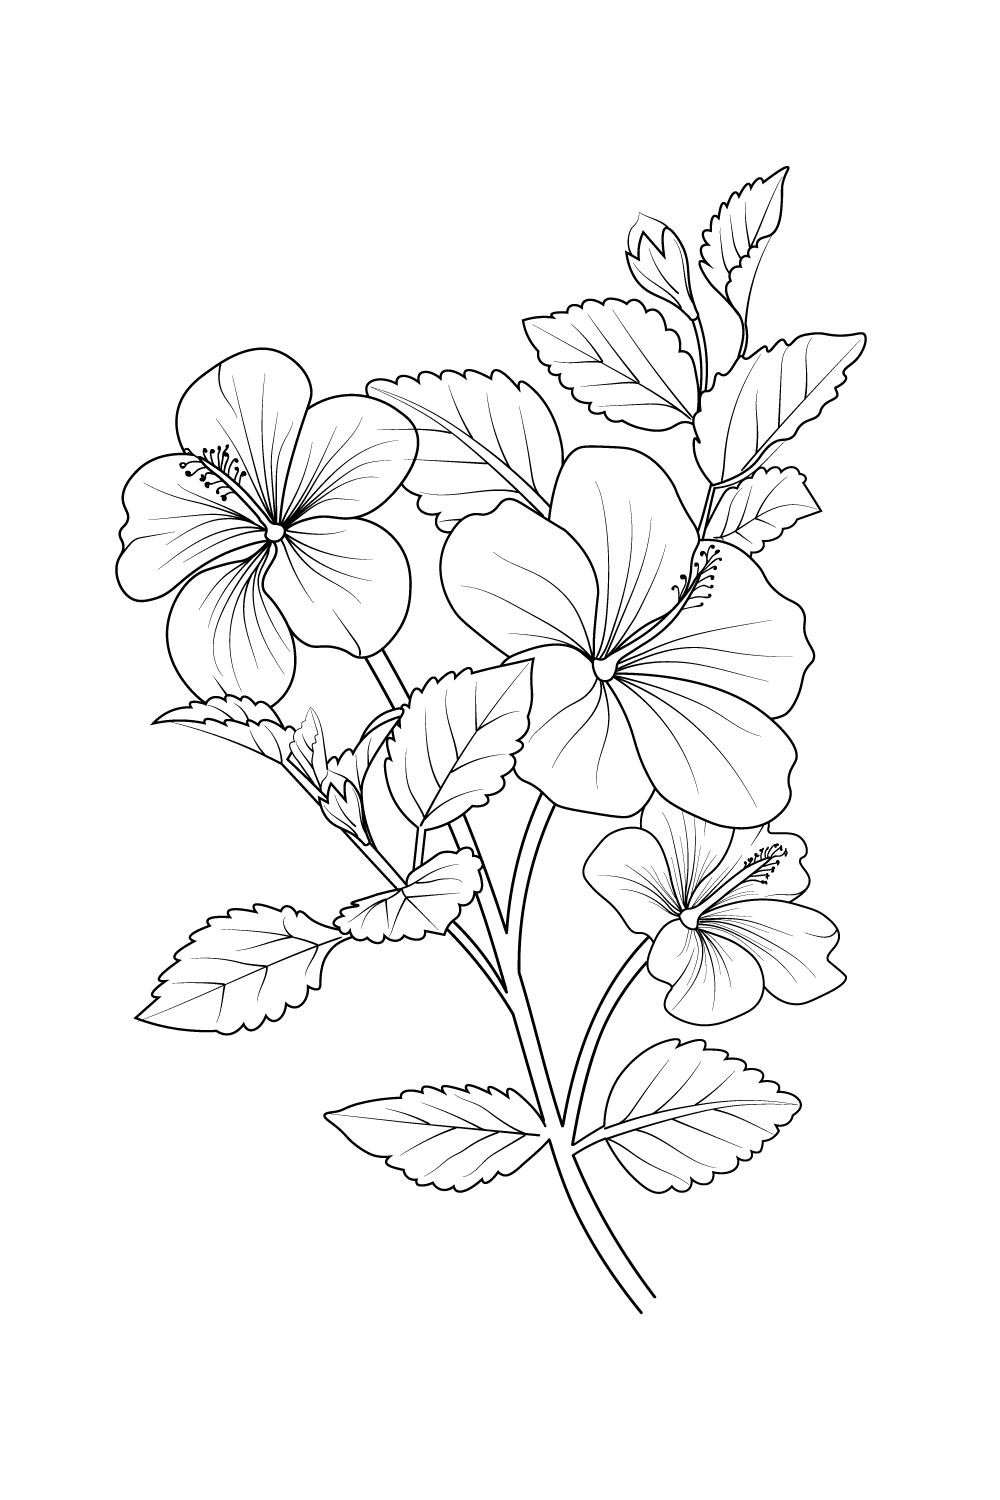 Isolated hibiscus hand-drawn vector sketch illustration, botanic collection branch of leaf buds natural collection coloring page pinterest preview image.